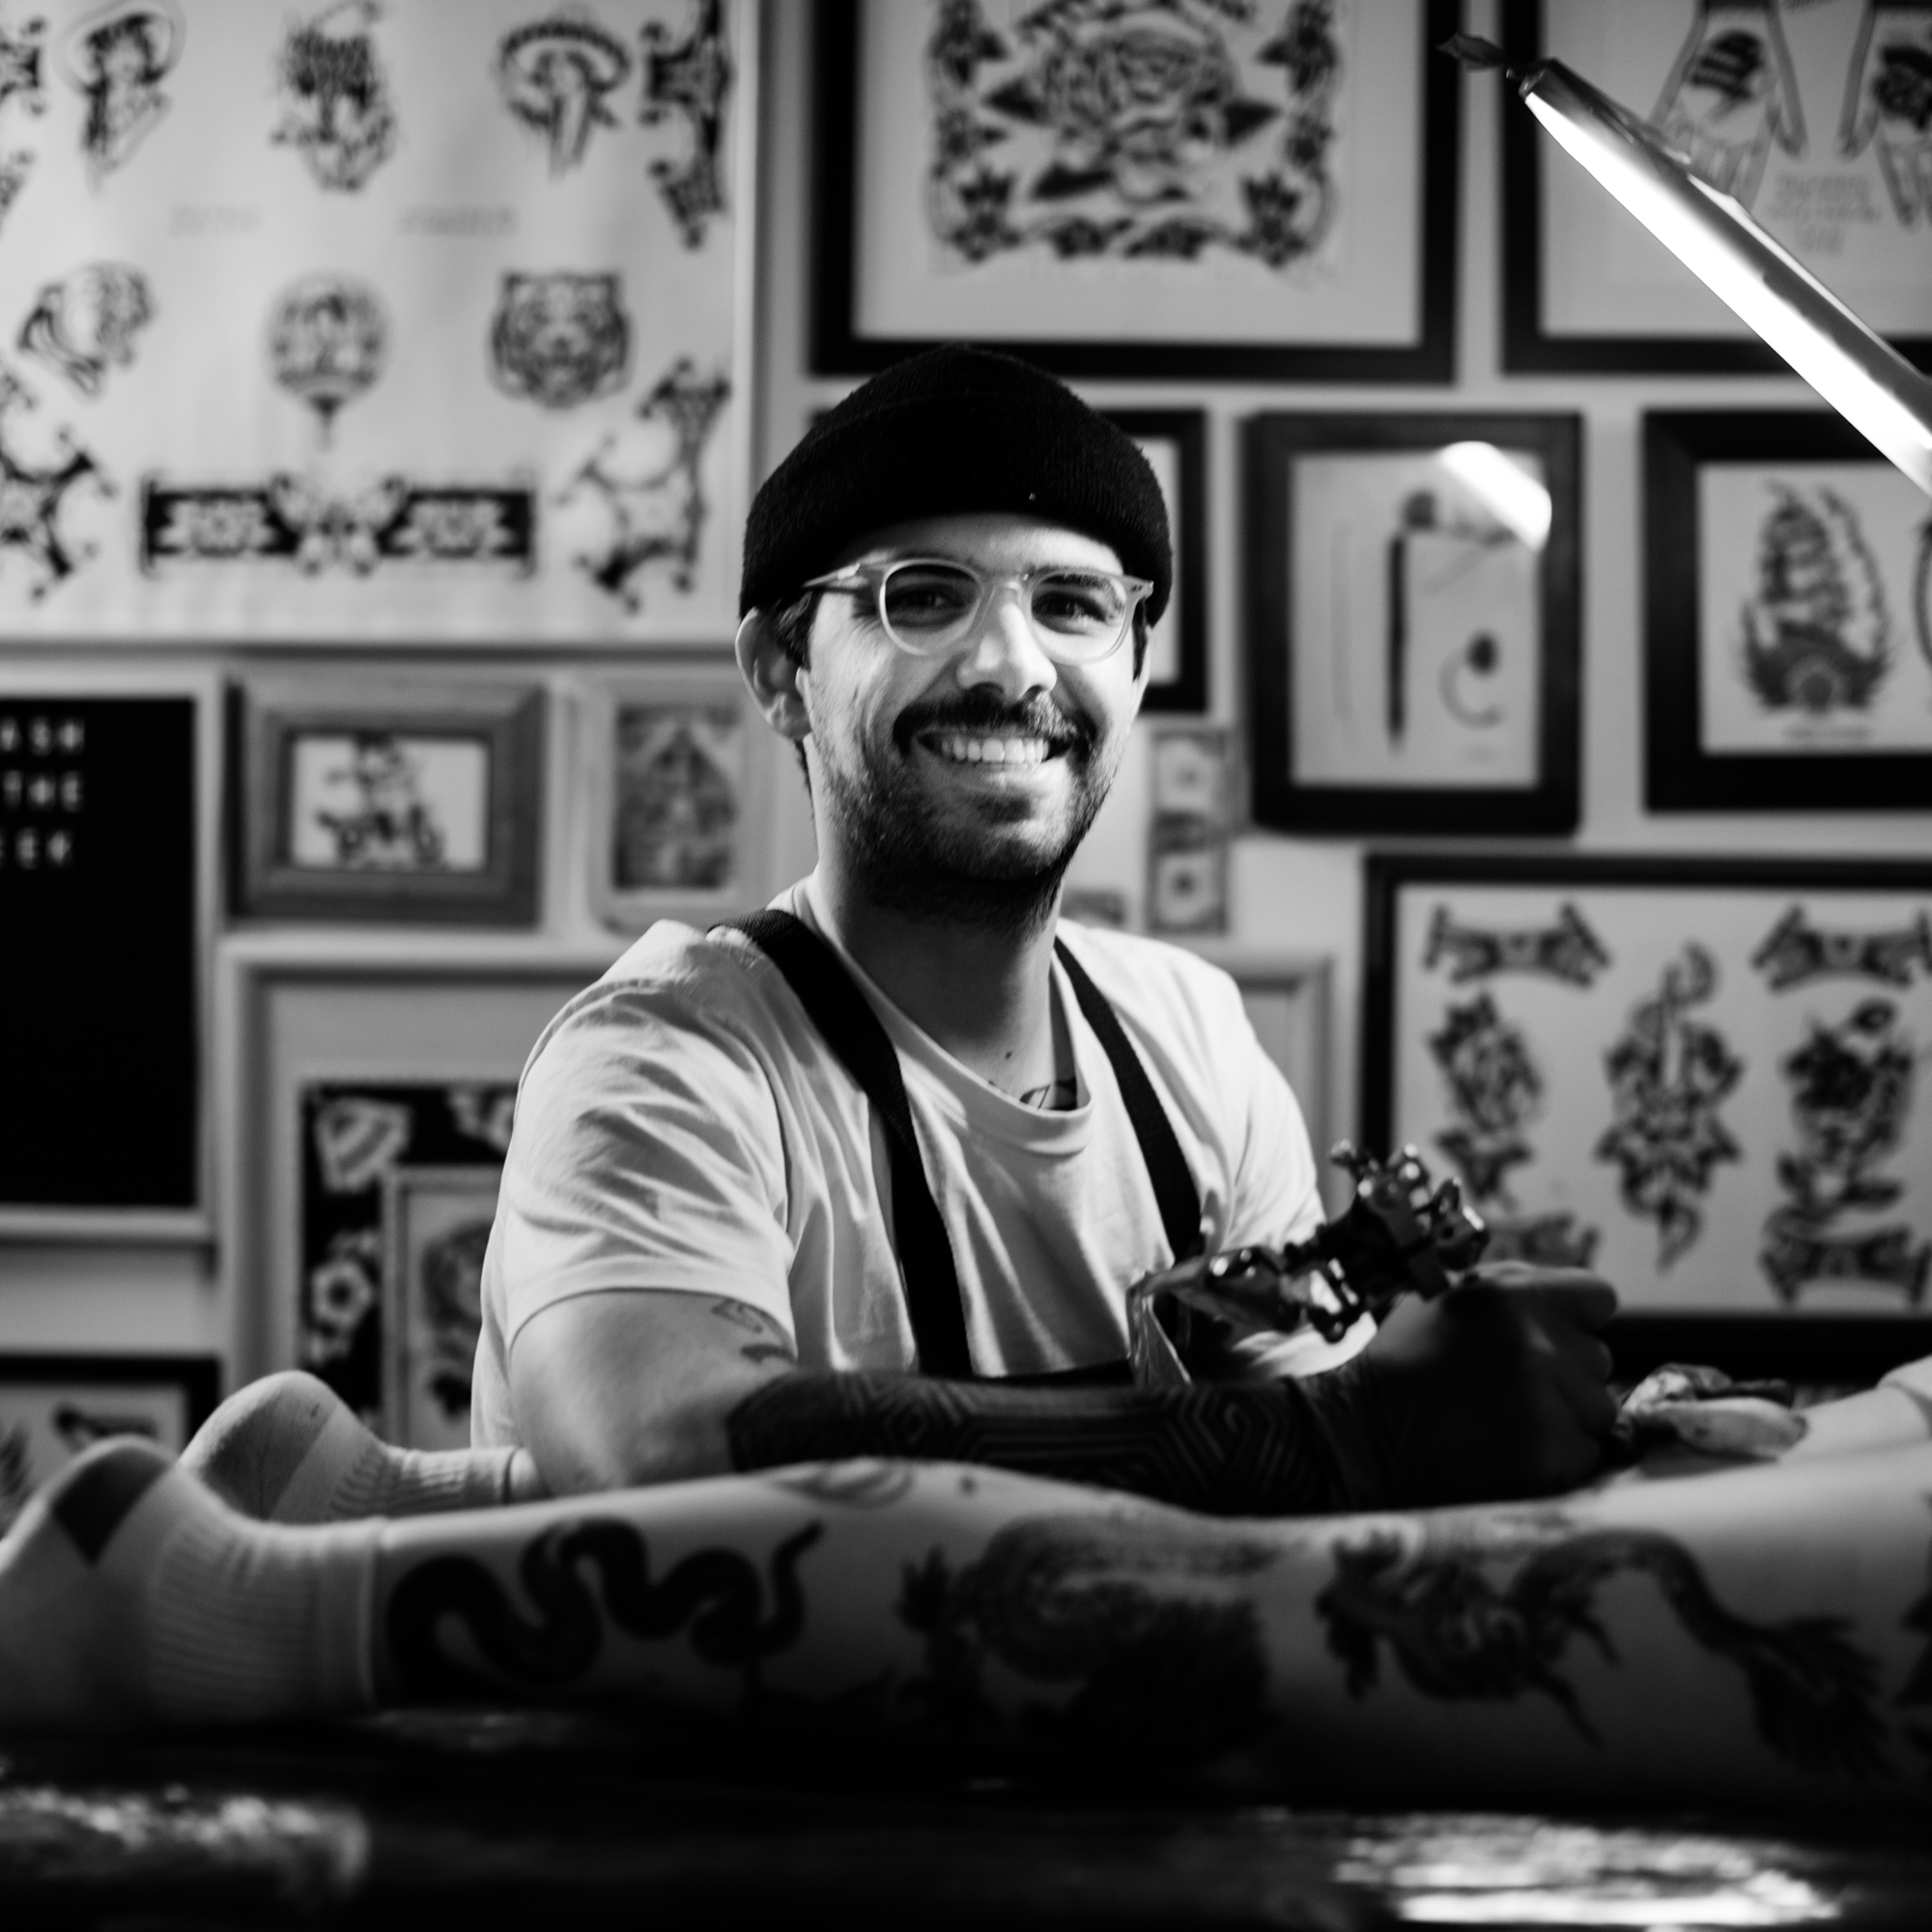 Ricardo Rios from Three Dice Tattoo, Auckland specialises in bold, solid and heavily saturated tattoos